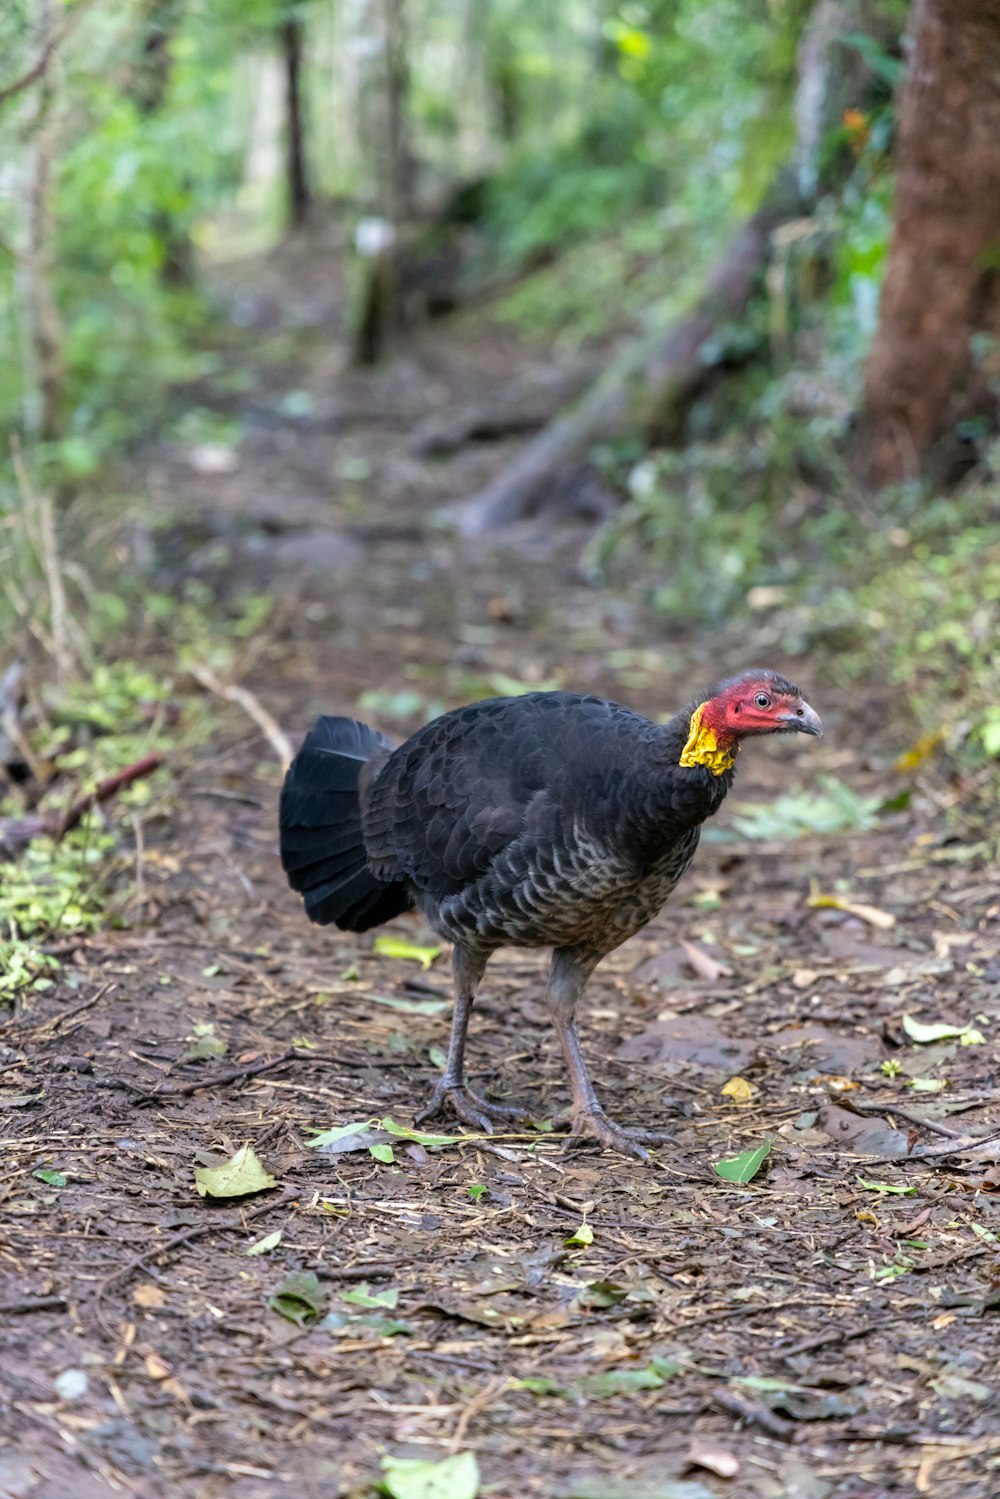 a black bird with a yellow and red head walking on a dirt path